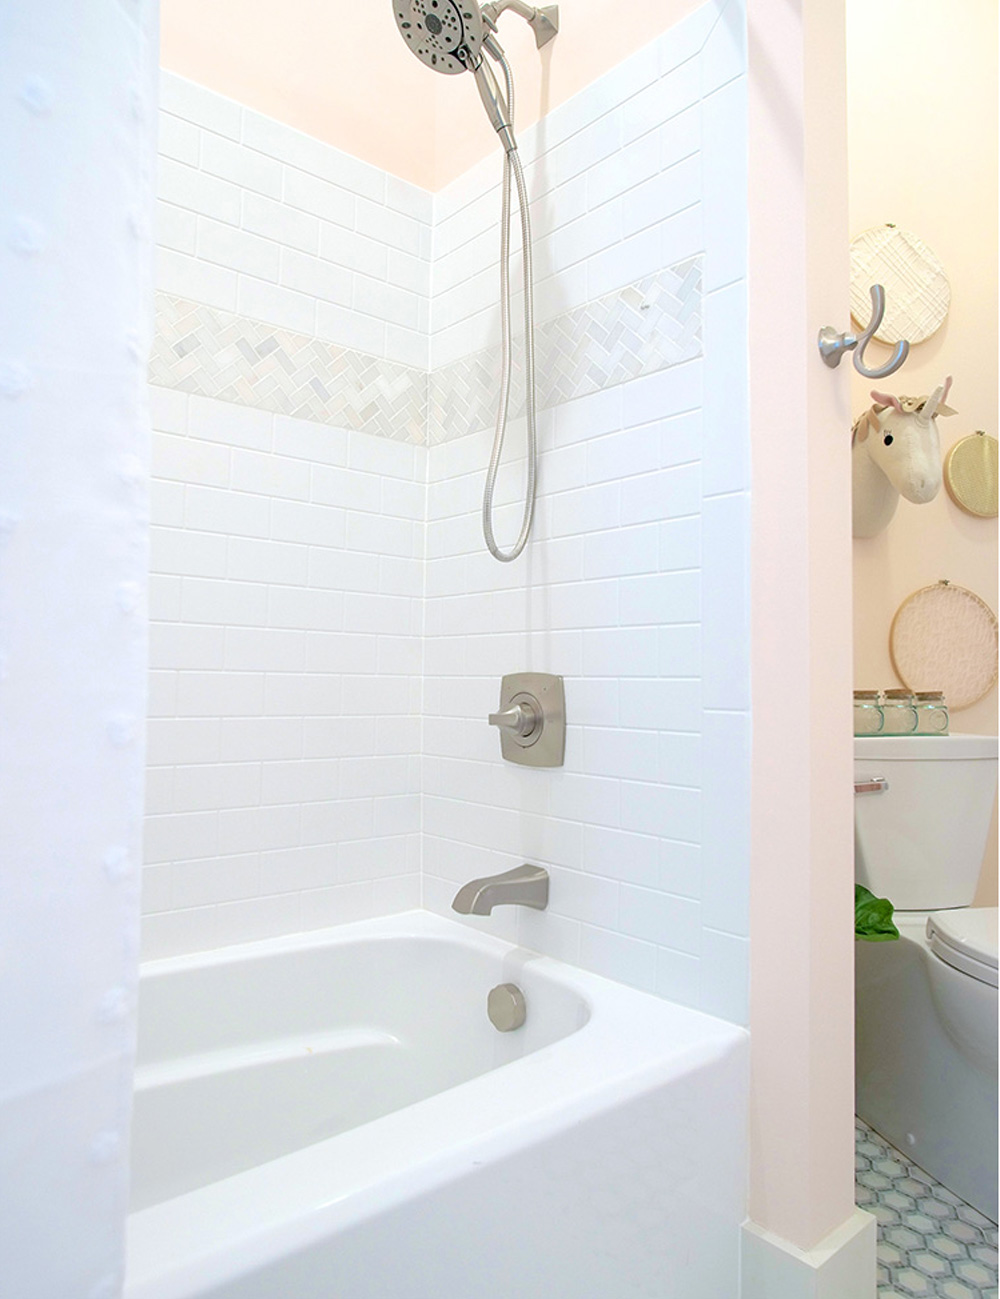 Shower area with a white tub, white and grey tile, silver shower head and faucet, and a white shower curtain.